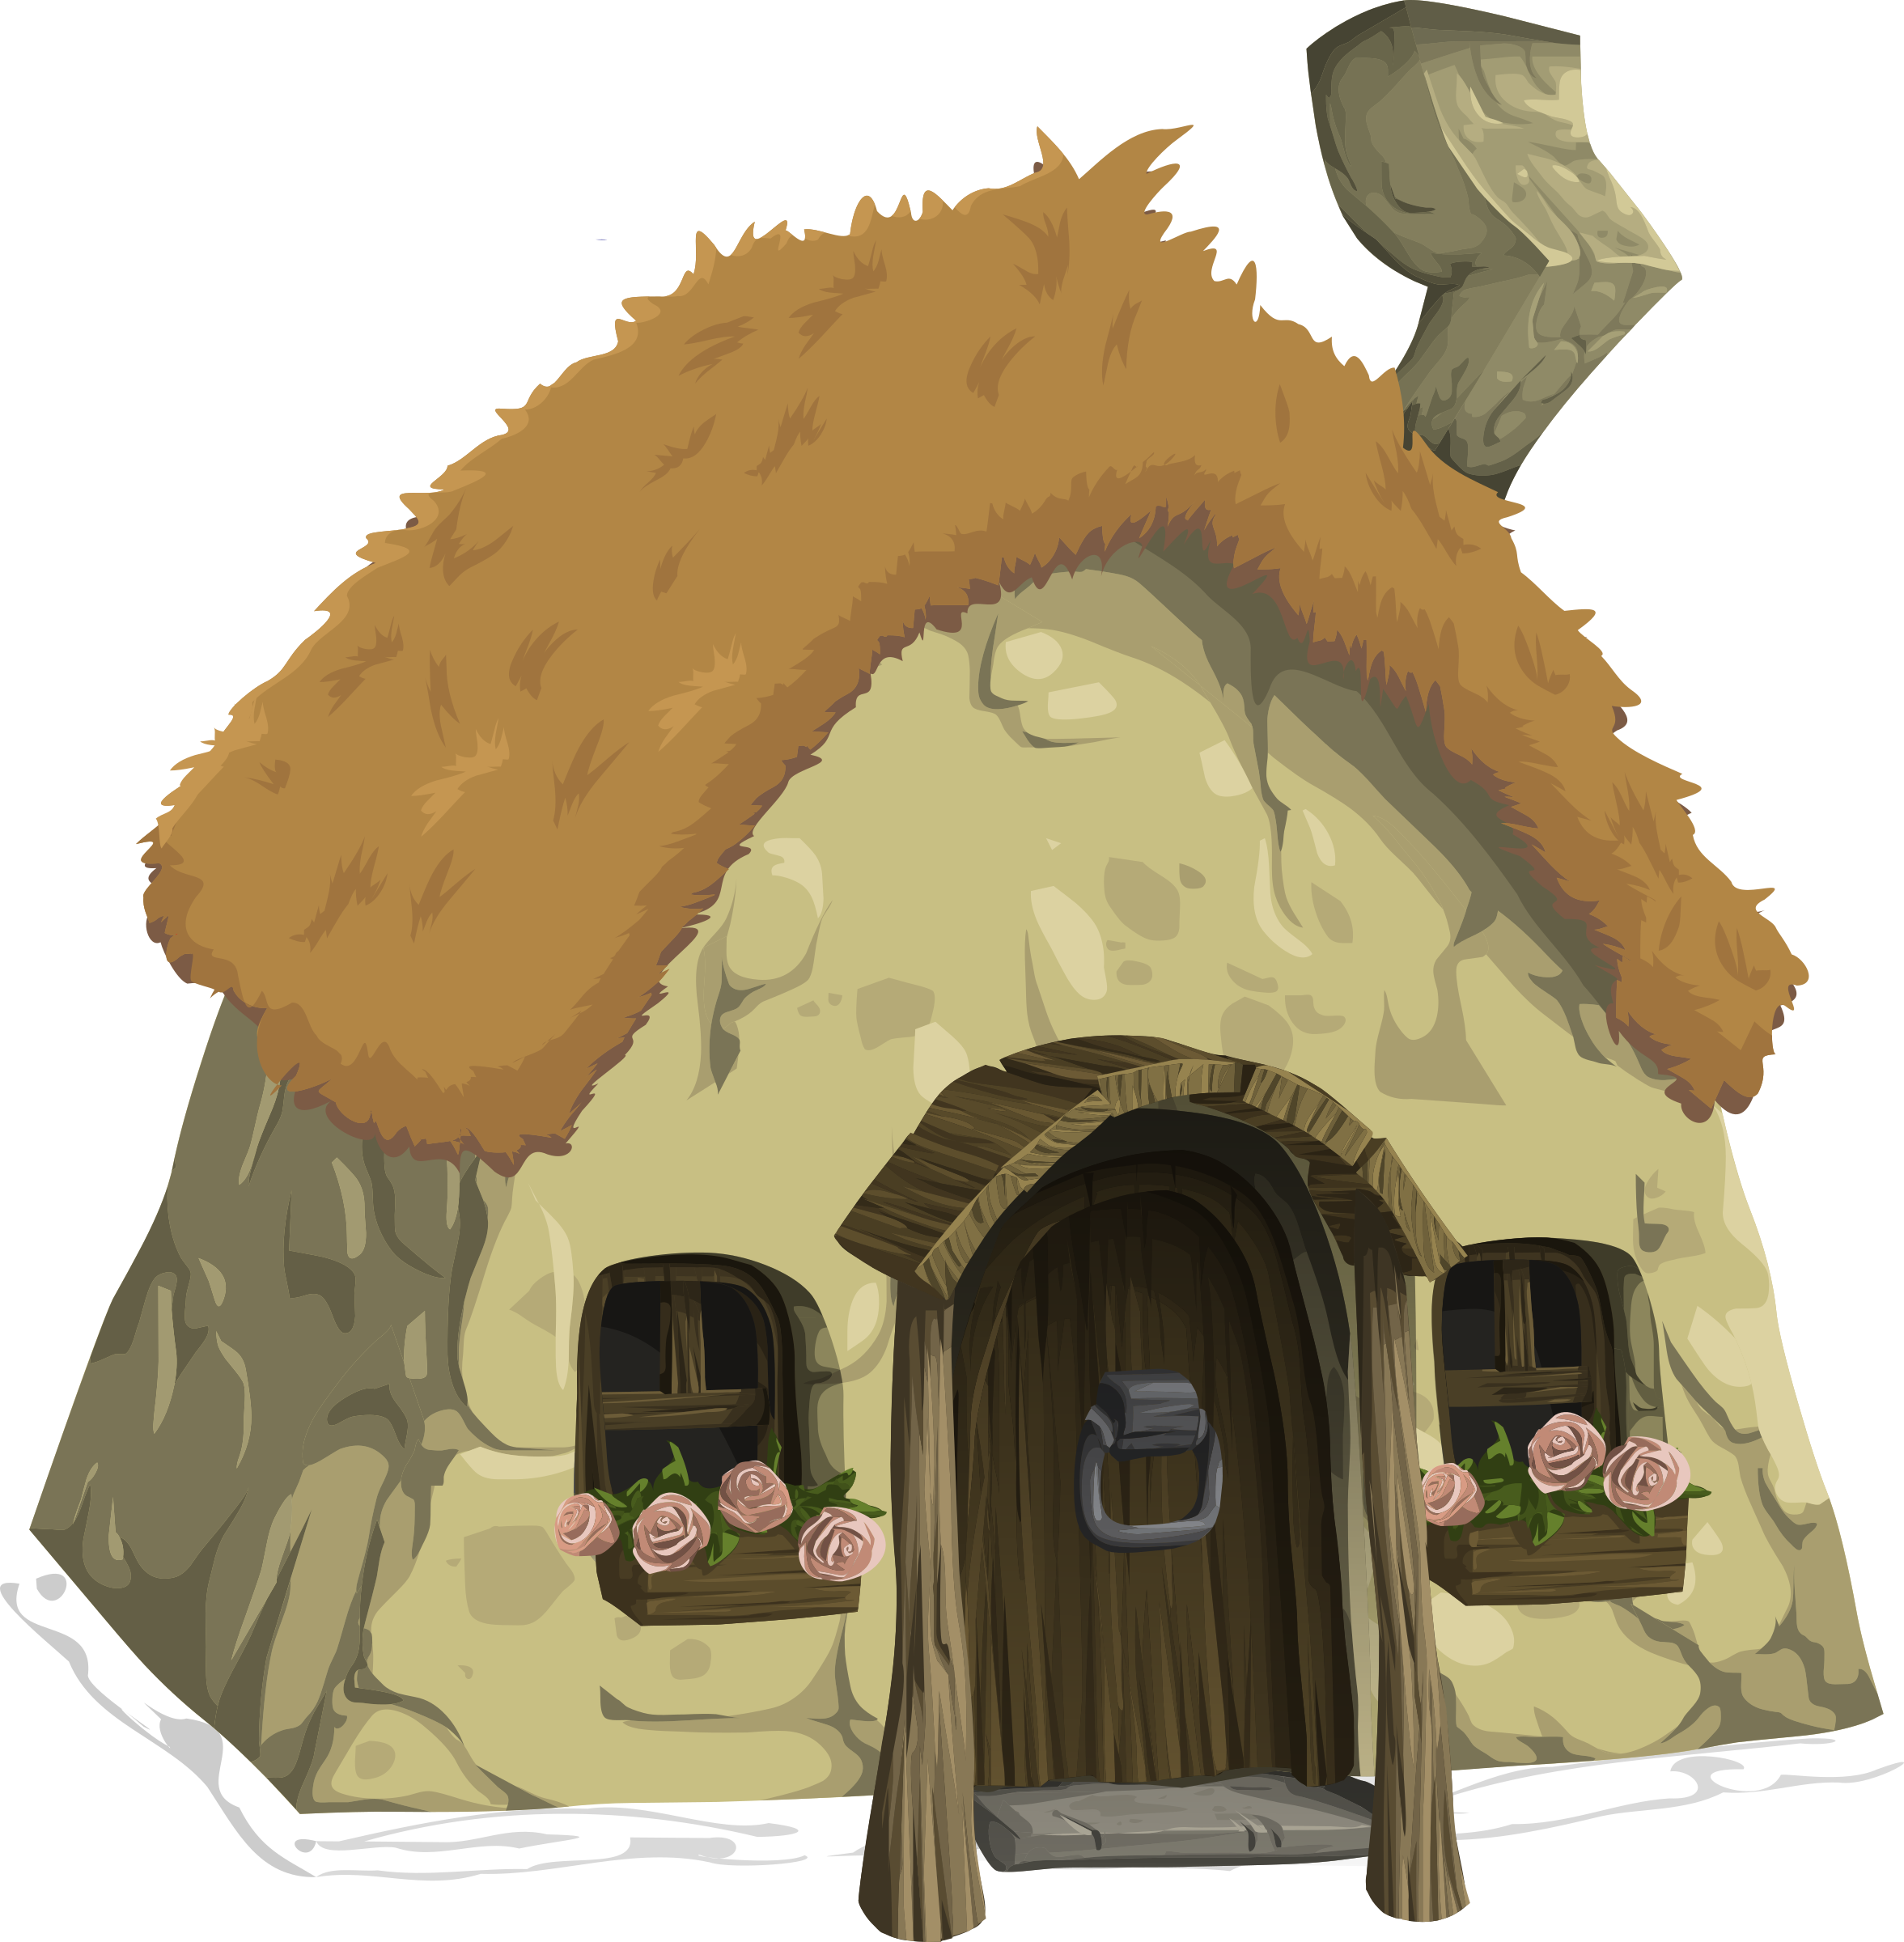 From Glitch Big Image - Thatched Roof Cottage Clip Art, Hd Png Download